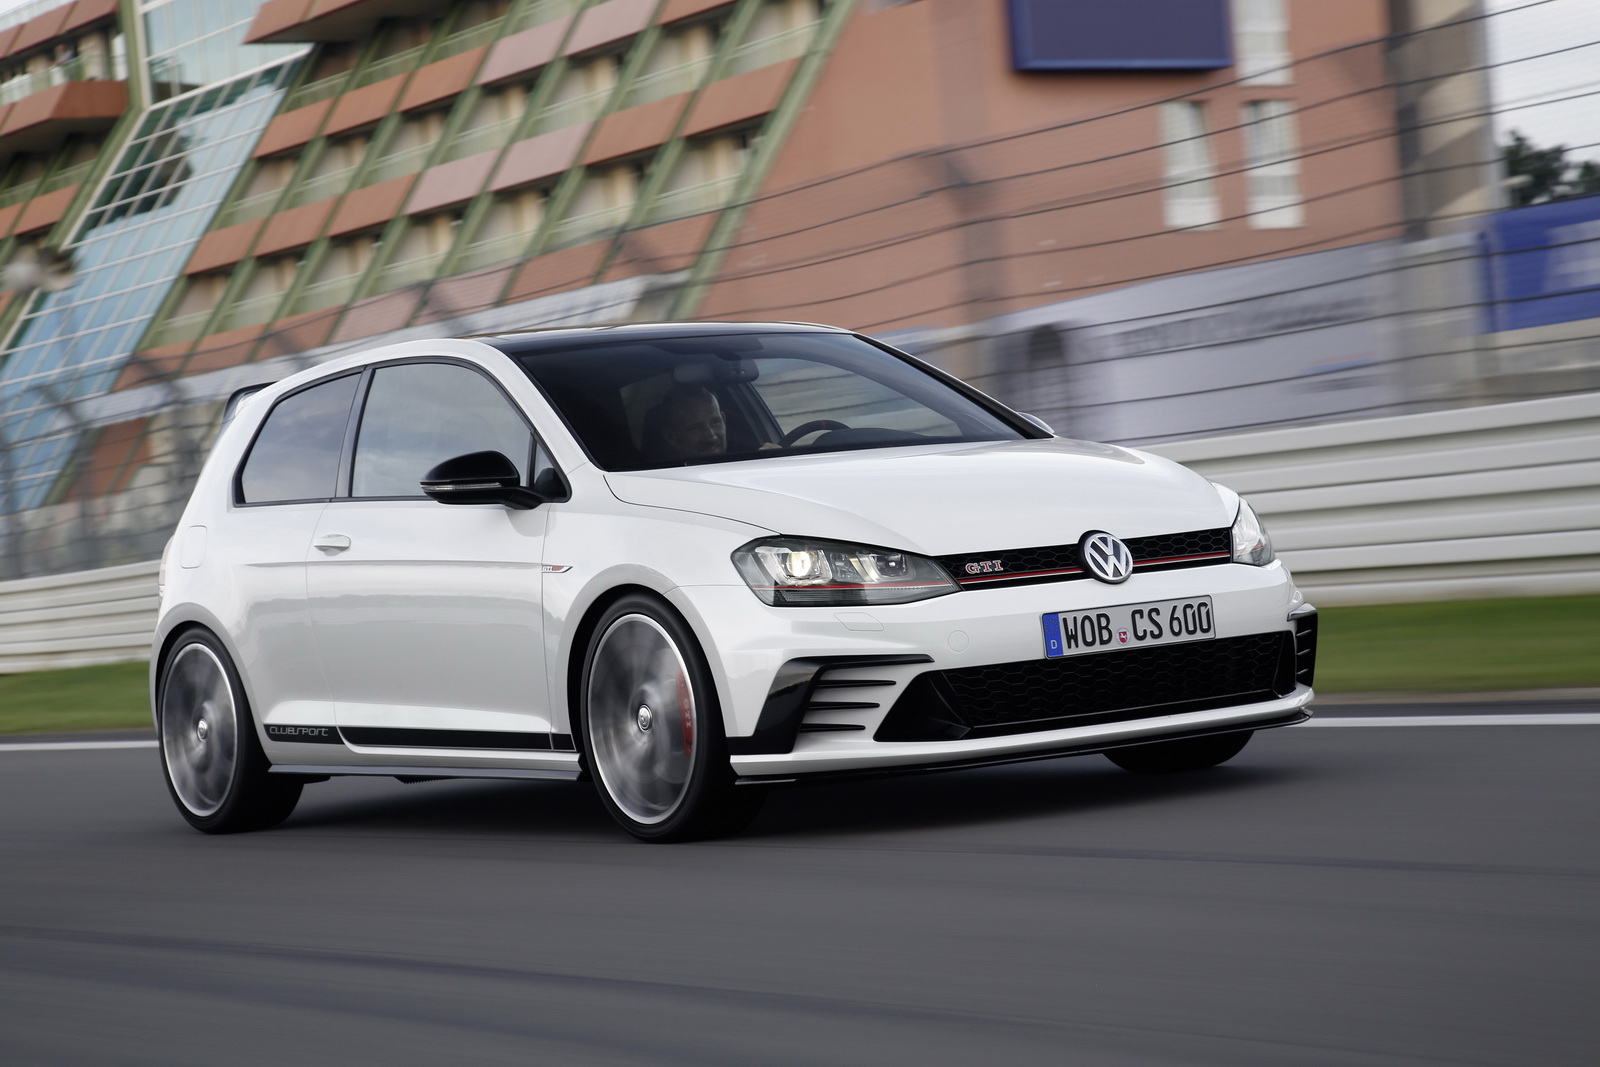 VW Golf GTI Clubsport Revealed With Nearly 300 HP, Still FWD